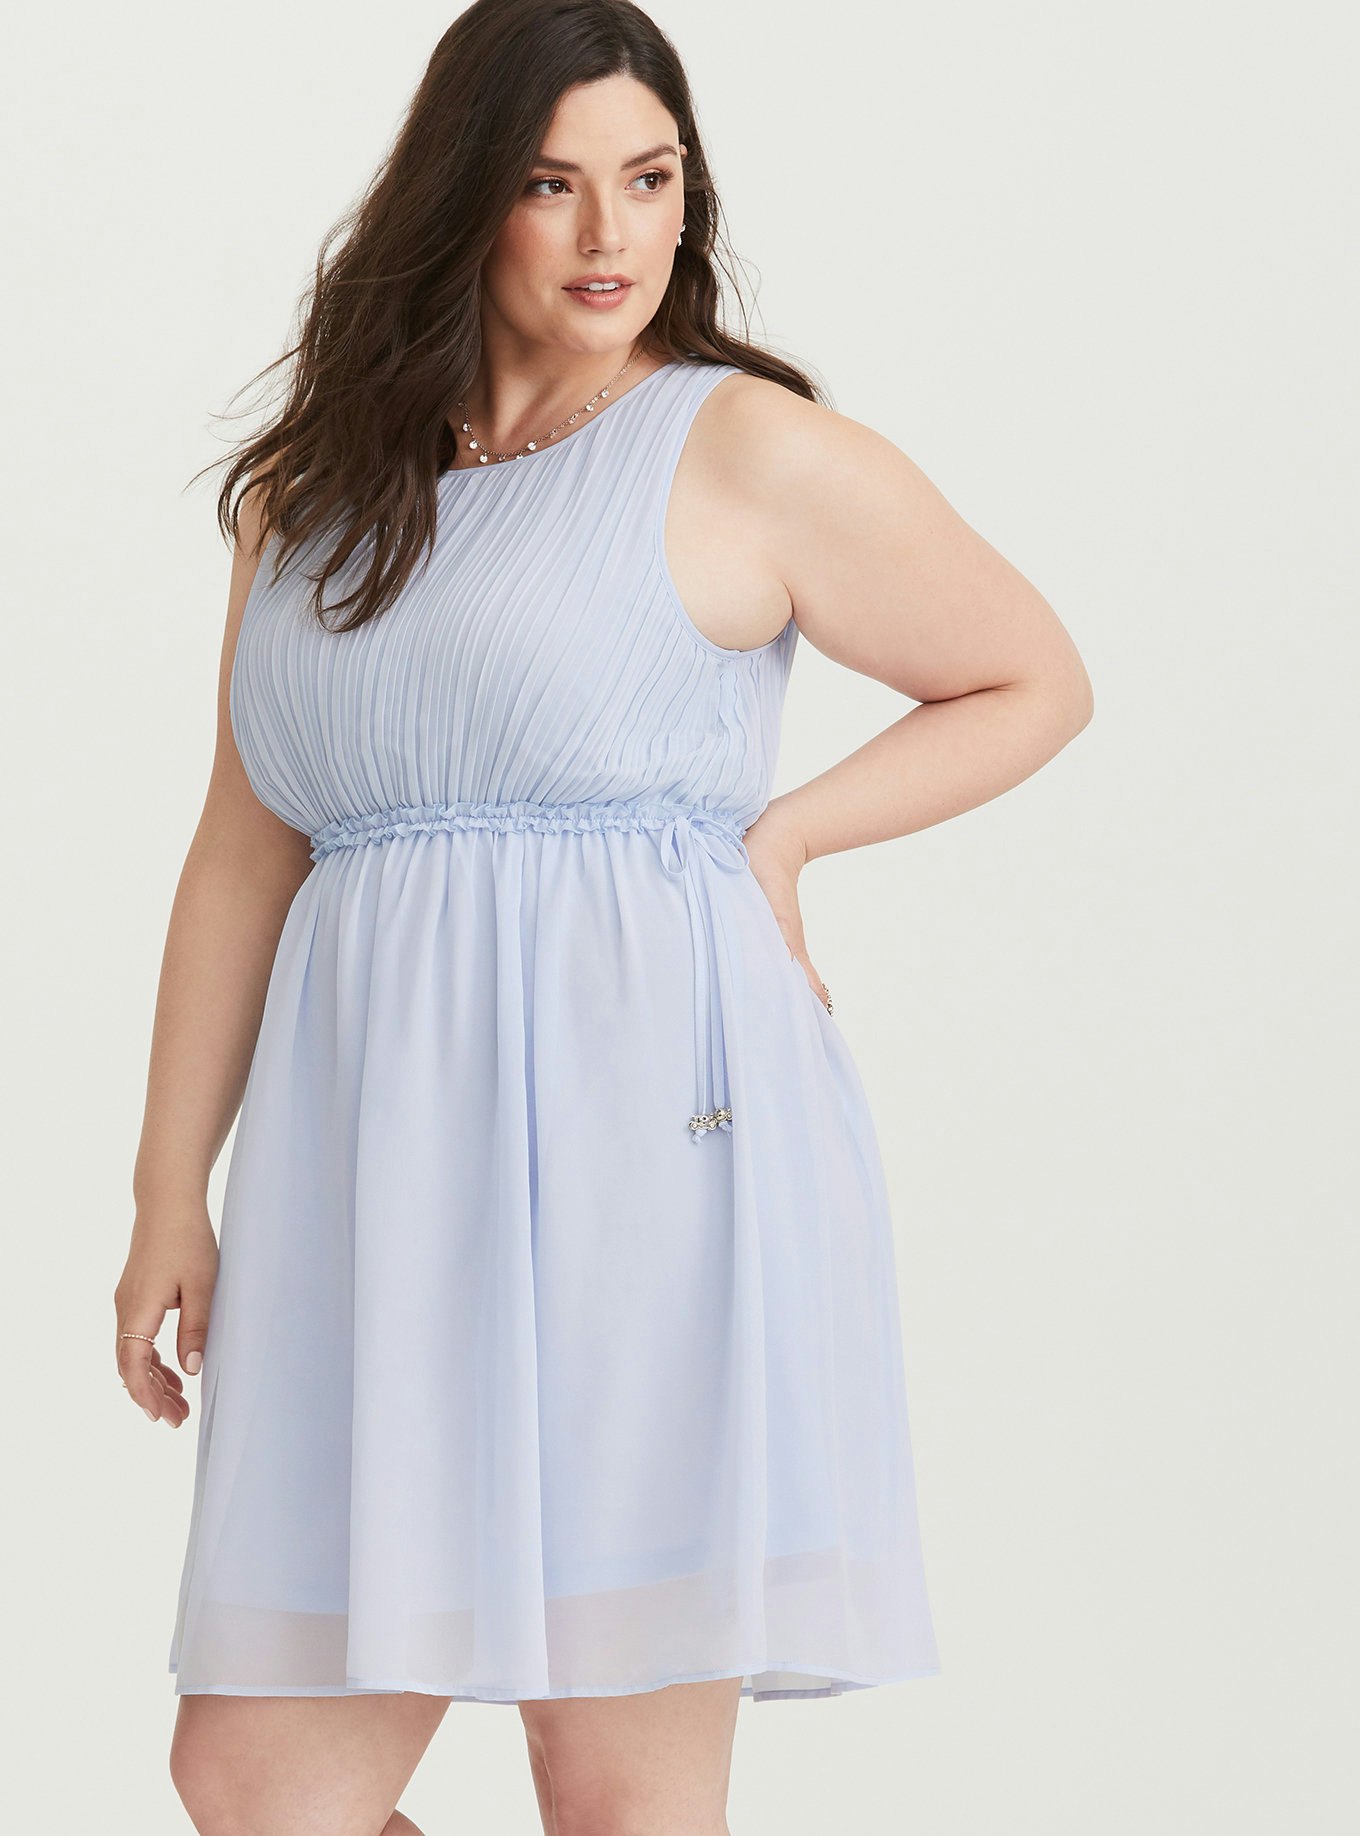 Torrid's Cinderella Collection Is A Dream Come True — So If The Dress Fits,  Wear It